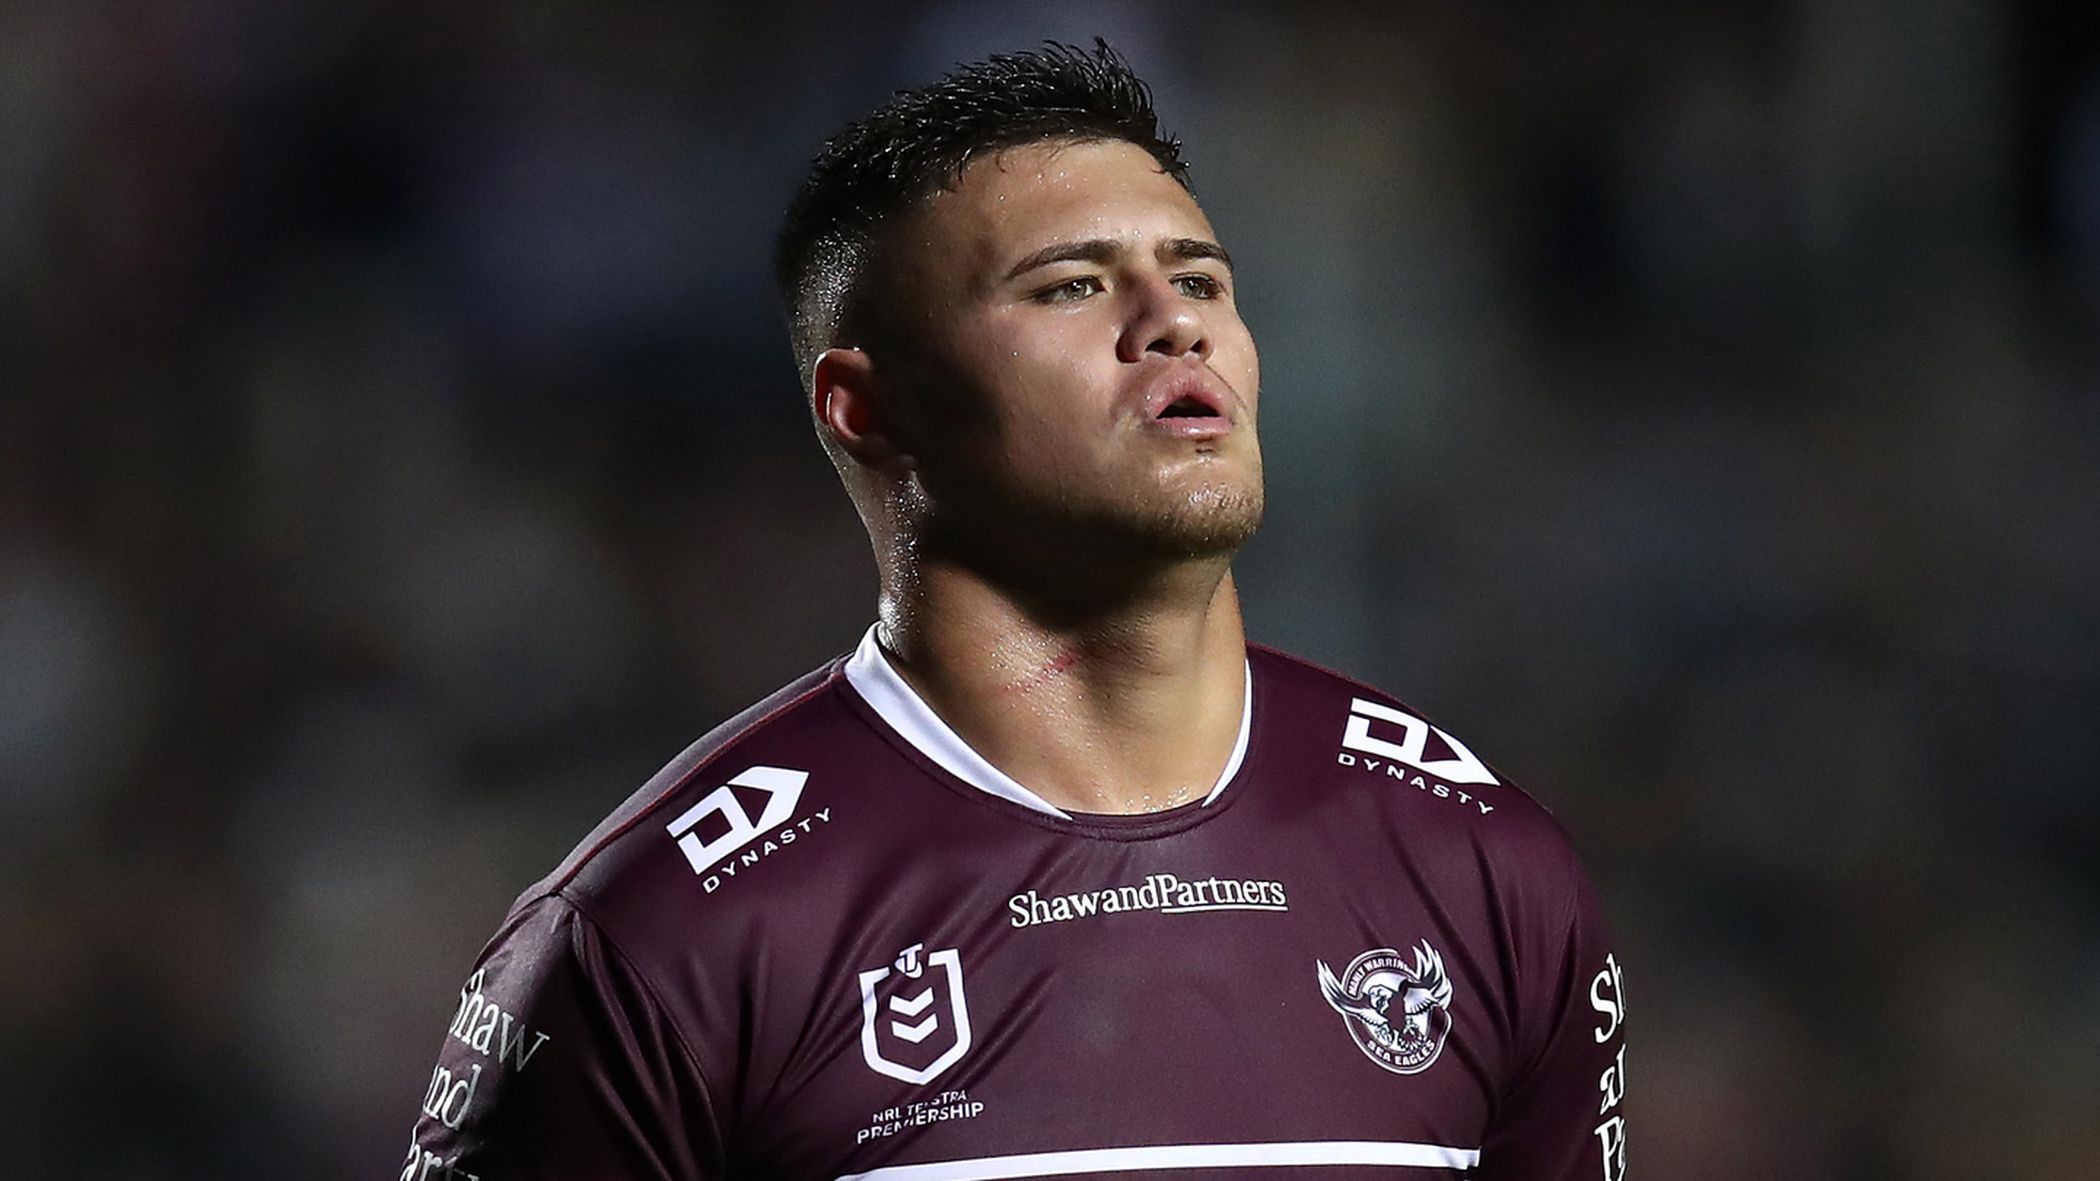 Manly coach Anthony Seibold admits Josh Schuster has 'baggage' but stands up for under-fire star